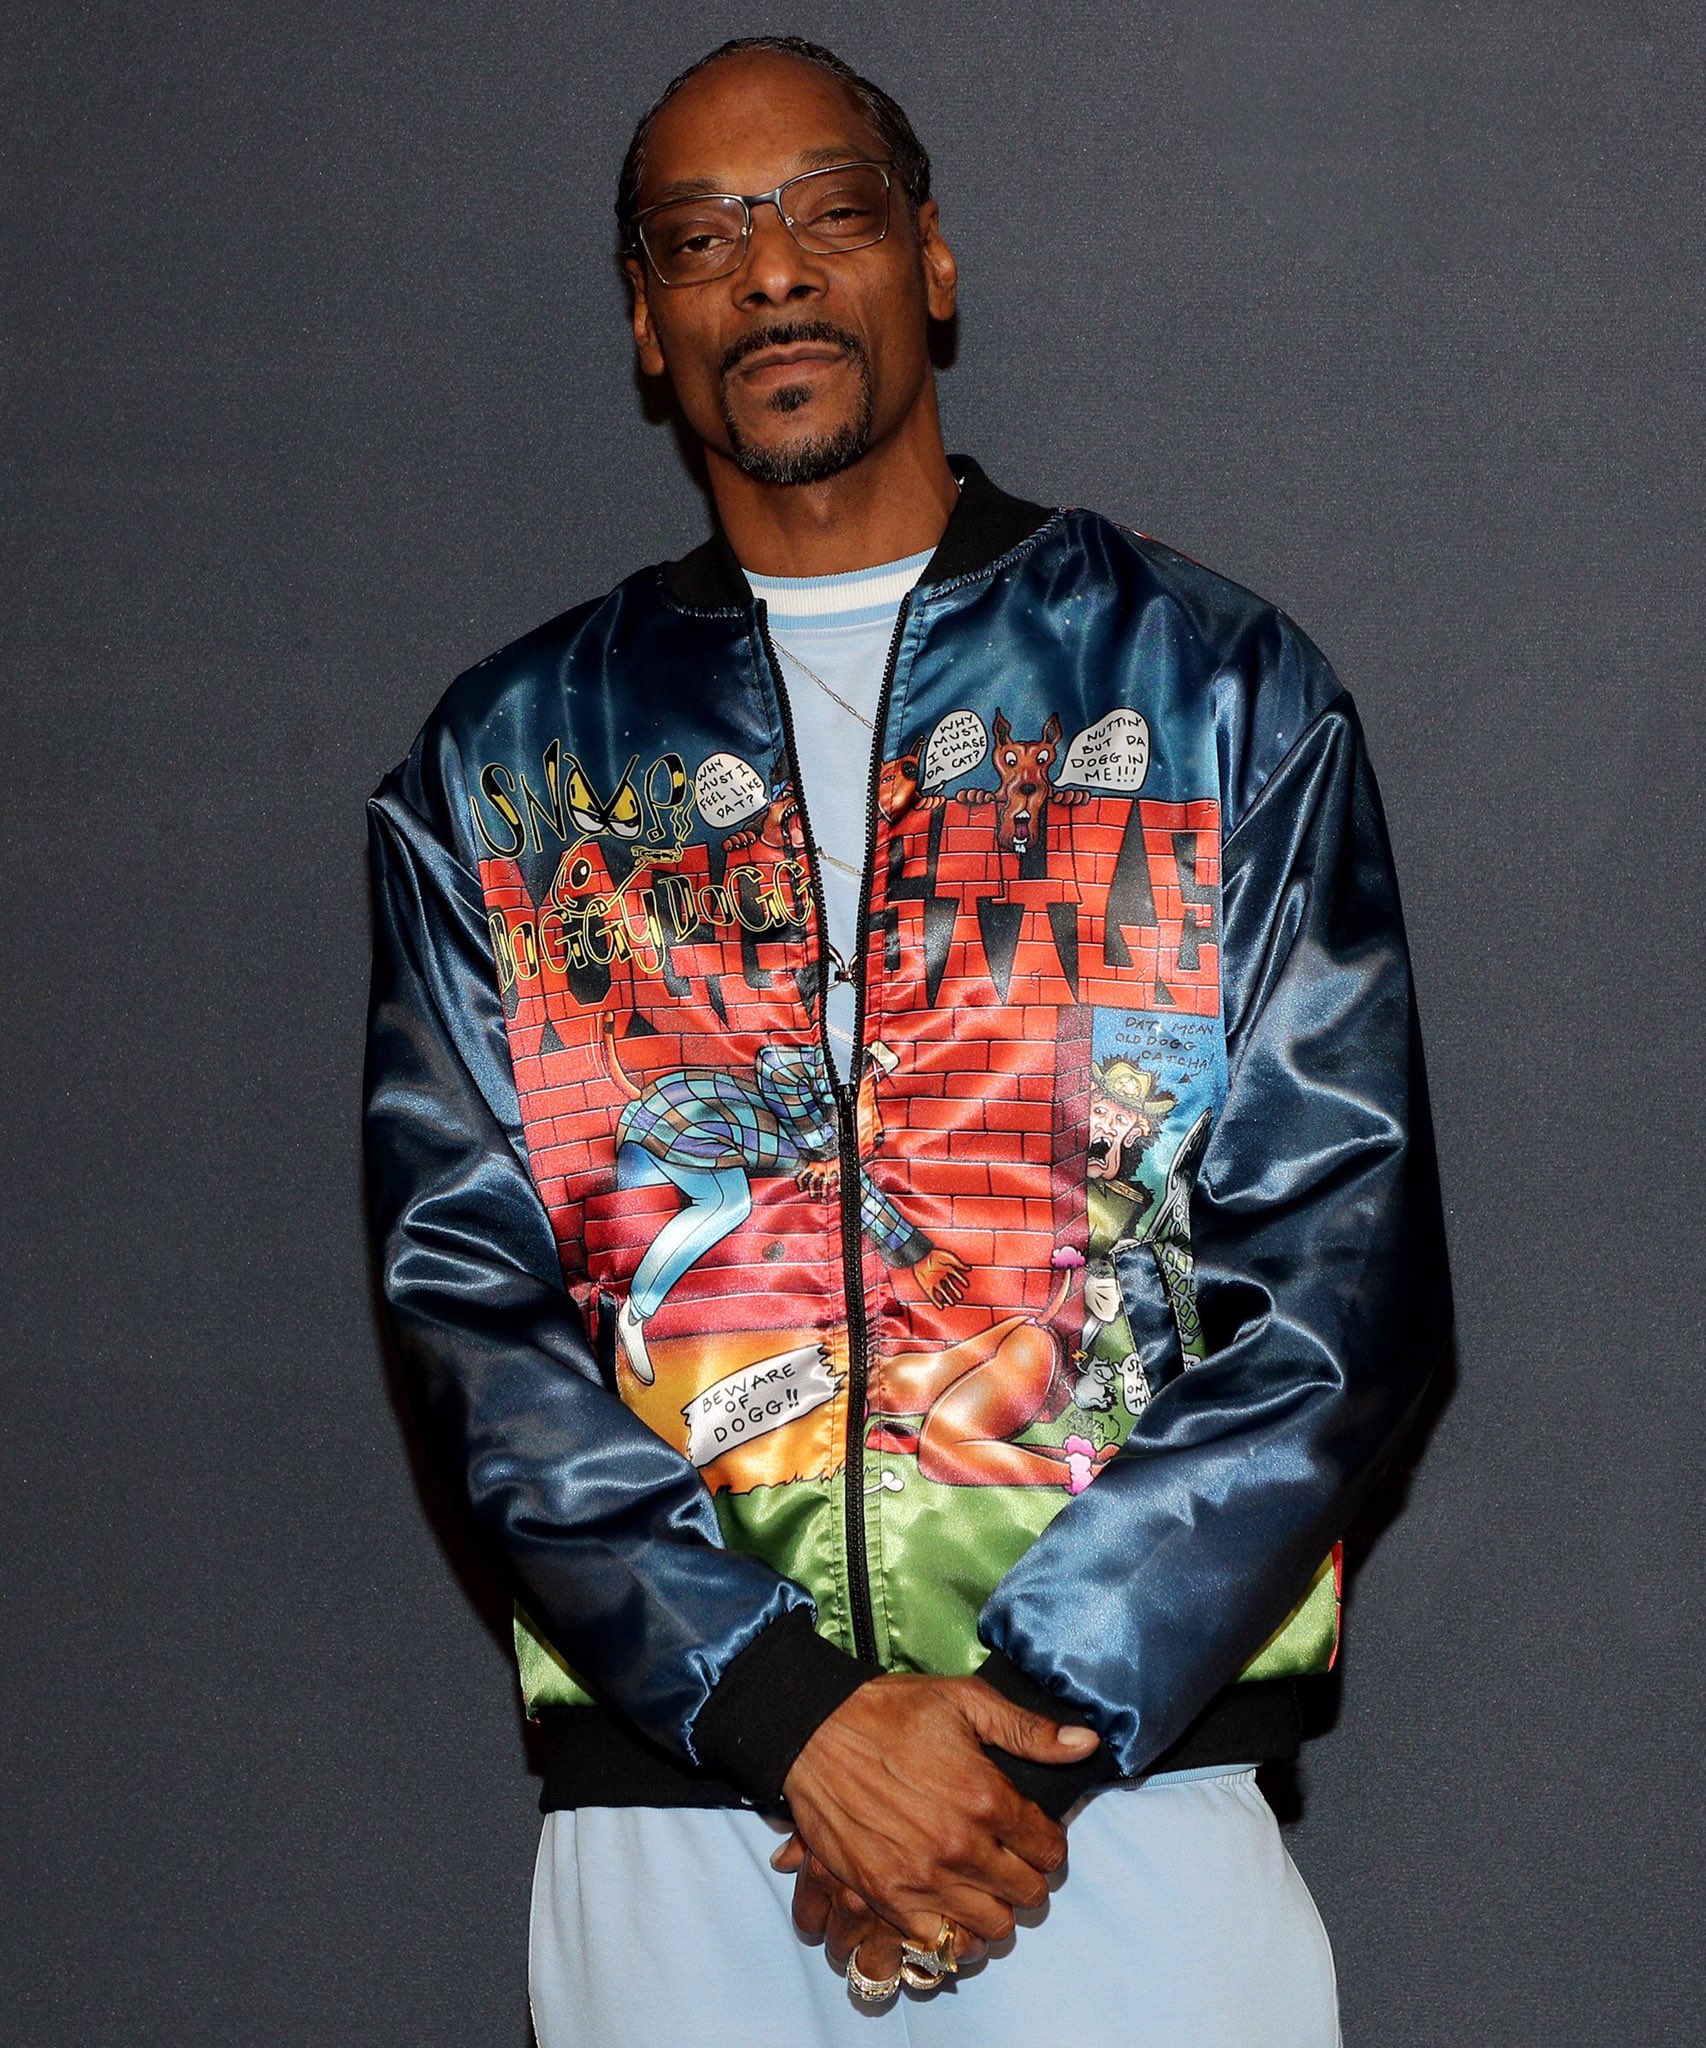 Eminem Pays Tribute to Snoop Dogg and His Album "Doggystyle" Print on His Hoodie